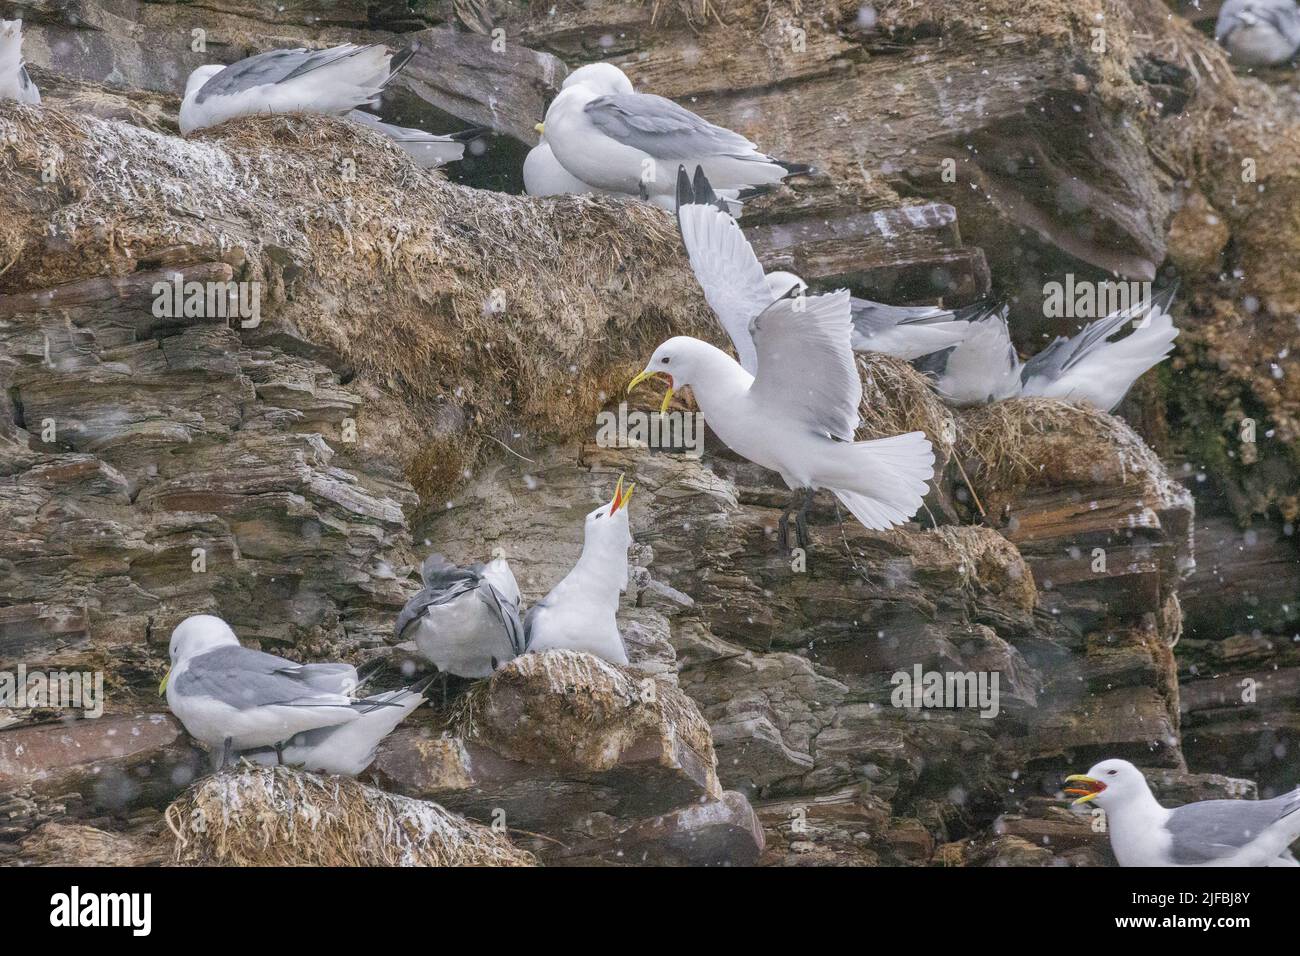 Norway, Varanger Fjord, Vadso, Ekkeroy protected area with important seabird colonies including a large breeding colony of black-legged kittiwakes or black-legged kittiwakes (Rissa tridactyla) on a cliff, Stock Photo